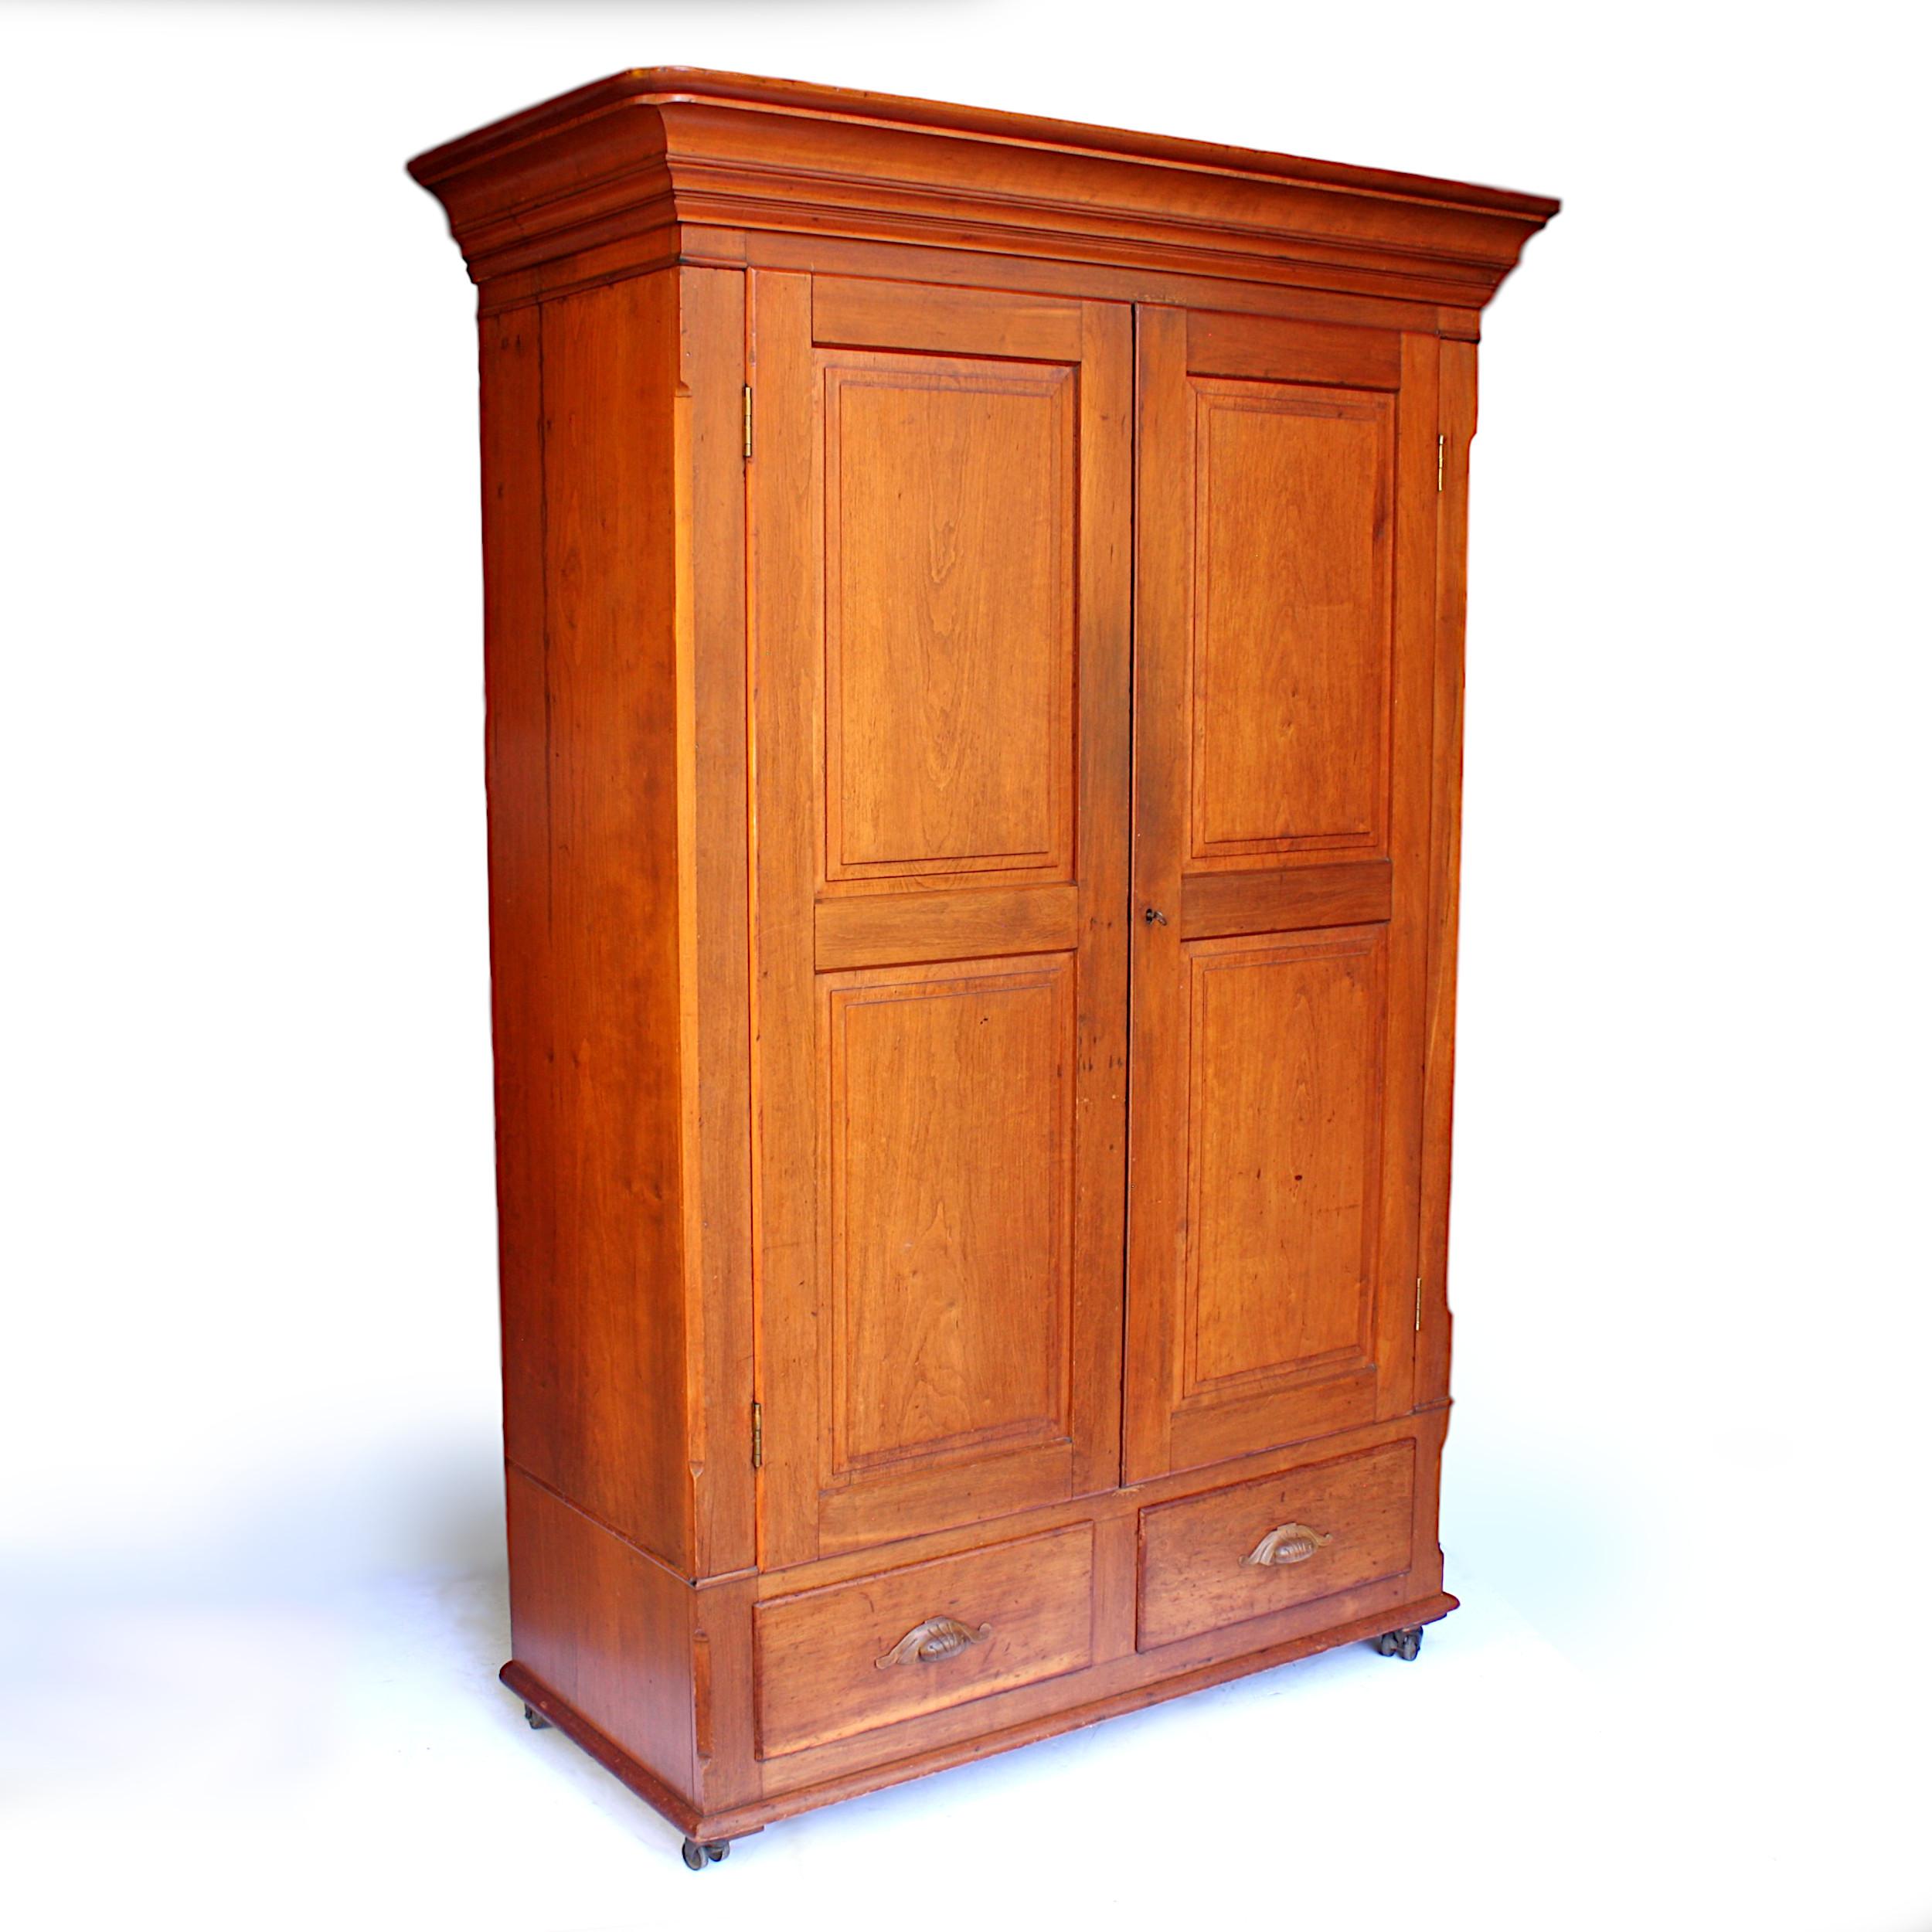 Wonderful 1880s neoclassical wardrobe with many unique features!

Features include:

- Solid cherrywood construction
- Swing-out hangers
- Original double-wheel steel casters
- Knock-down/collapsible design
- Secret compartment hidden under